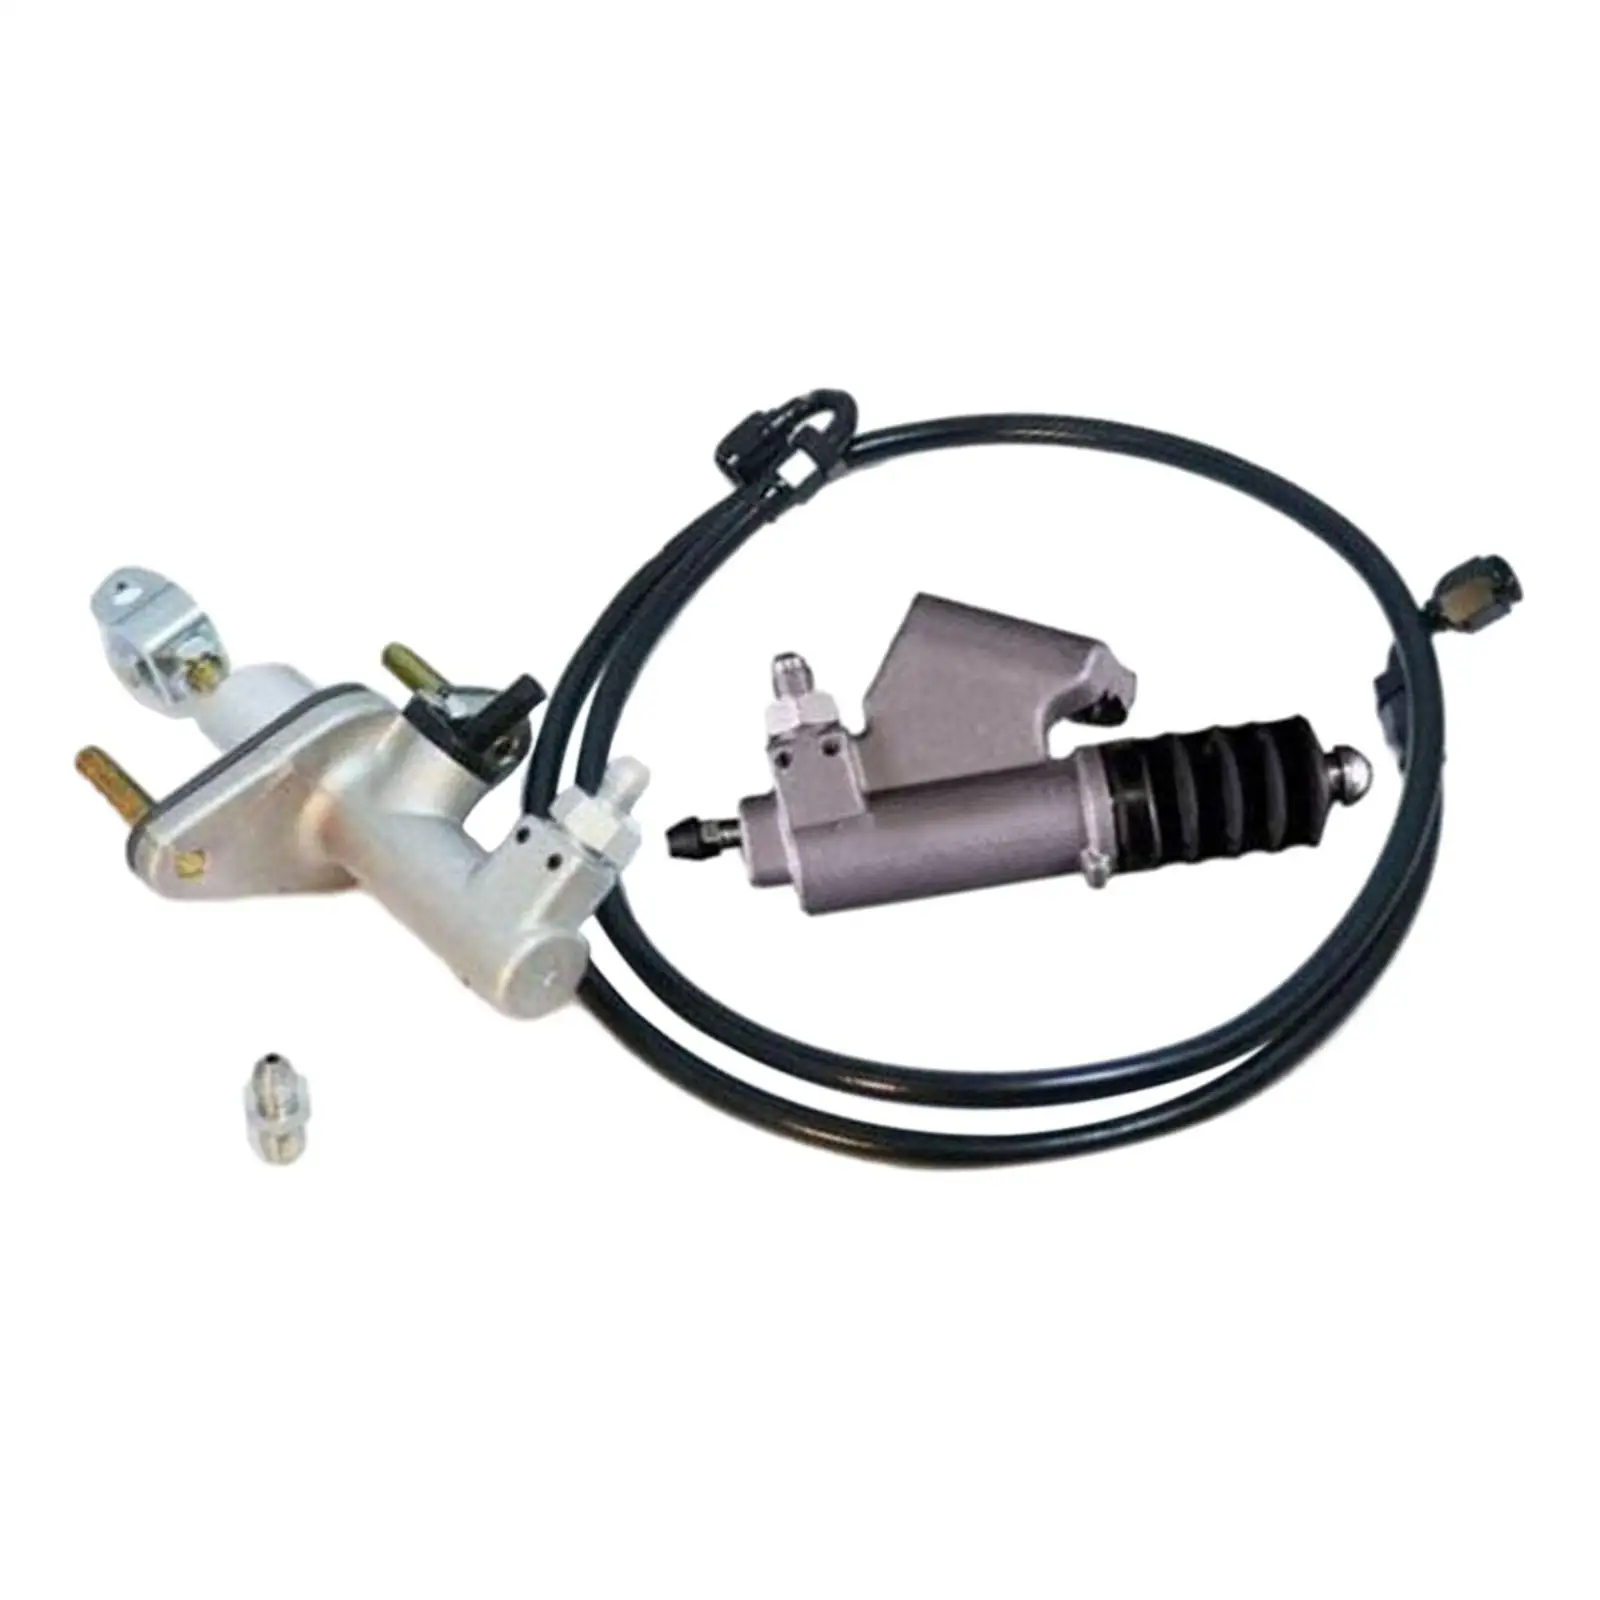 Ktd-clk-kms Clutch Master Cylinder Kit for Acura Automotive Accessories